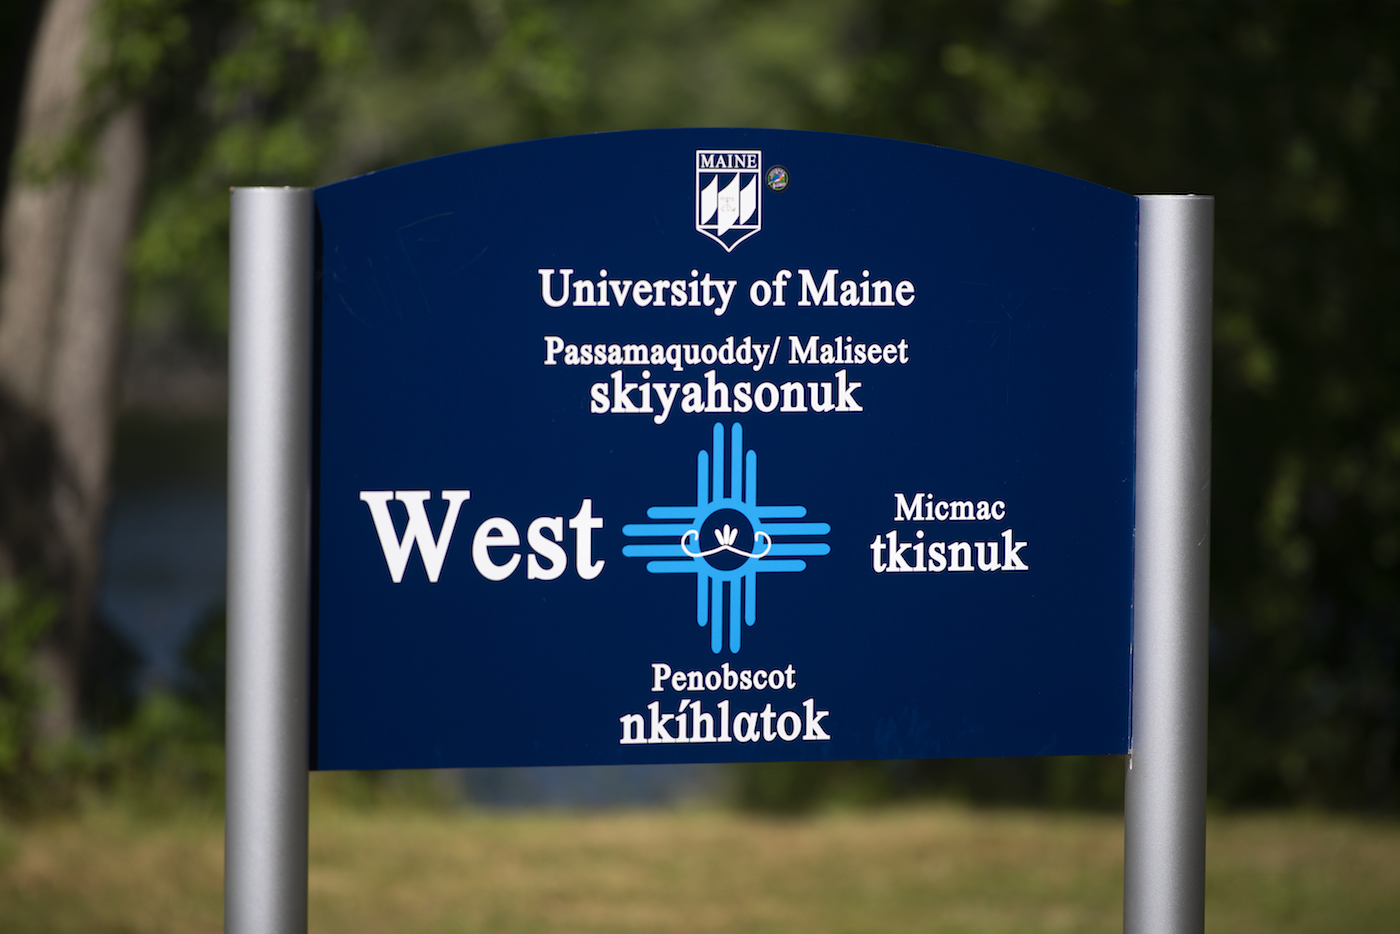 A photo of the sign at the west entrance of the University of Maine campus